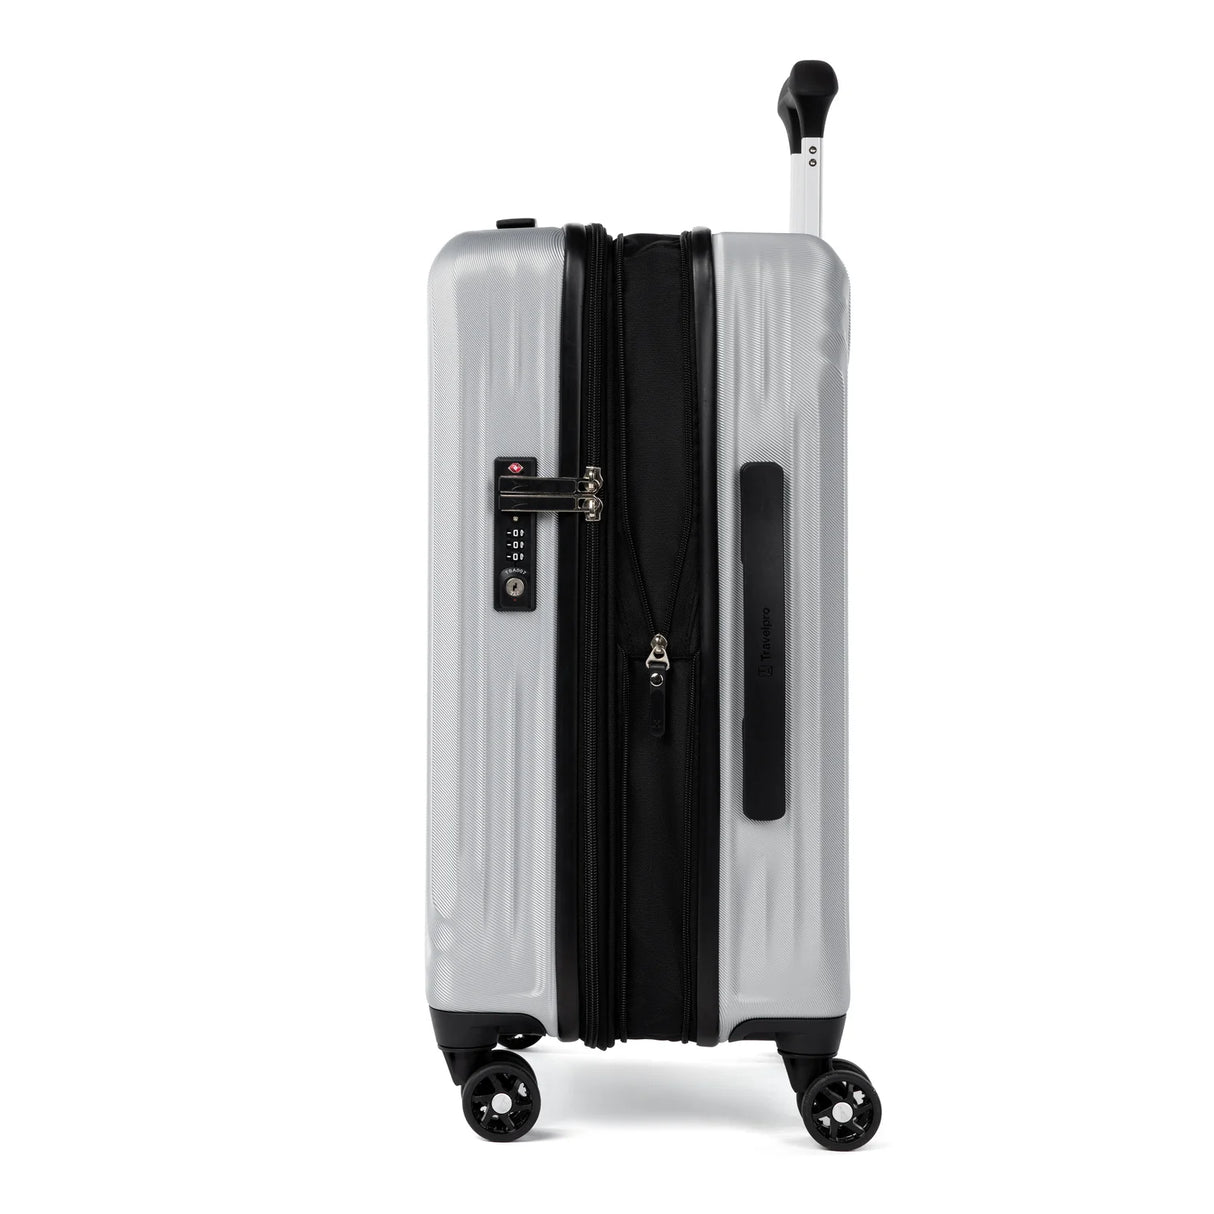 Travelpro Maxlite Air Carry-On Expandable Hardside Spinner , , 401229142_sideexpanded-1500x1500-d707c29_1024x1024_2x_4254926b-aad3-4198-80f2-167c5e43132e